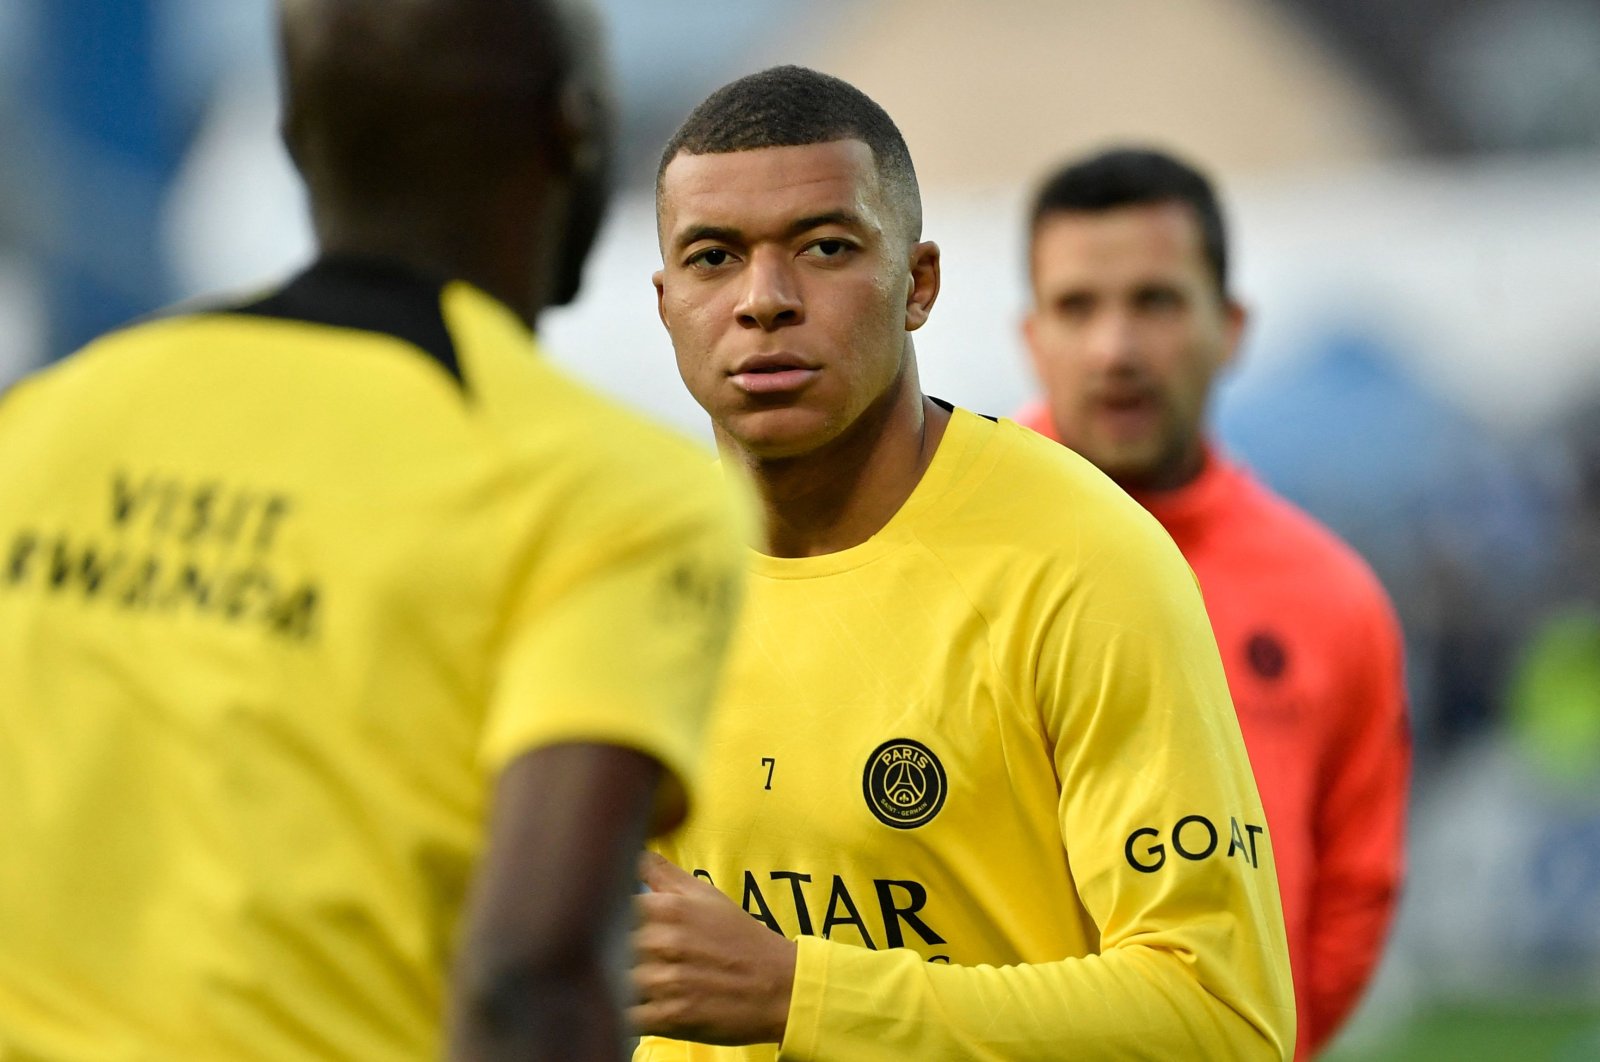 Paris Saint-Germain&#039;s French forward Kylian Mbappe looks on as he warms up before the French L1 football match between AJ Auxerre and PSG at Stade de l&#039;Abbe-Deschamps, Auxerre, France, May 21, 2023. (AFP Photo)